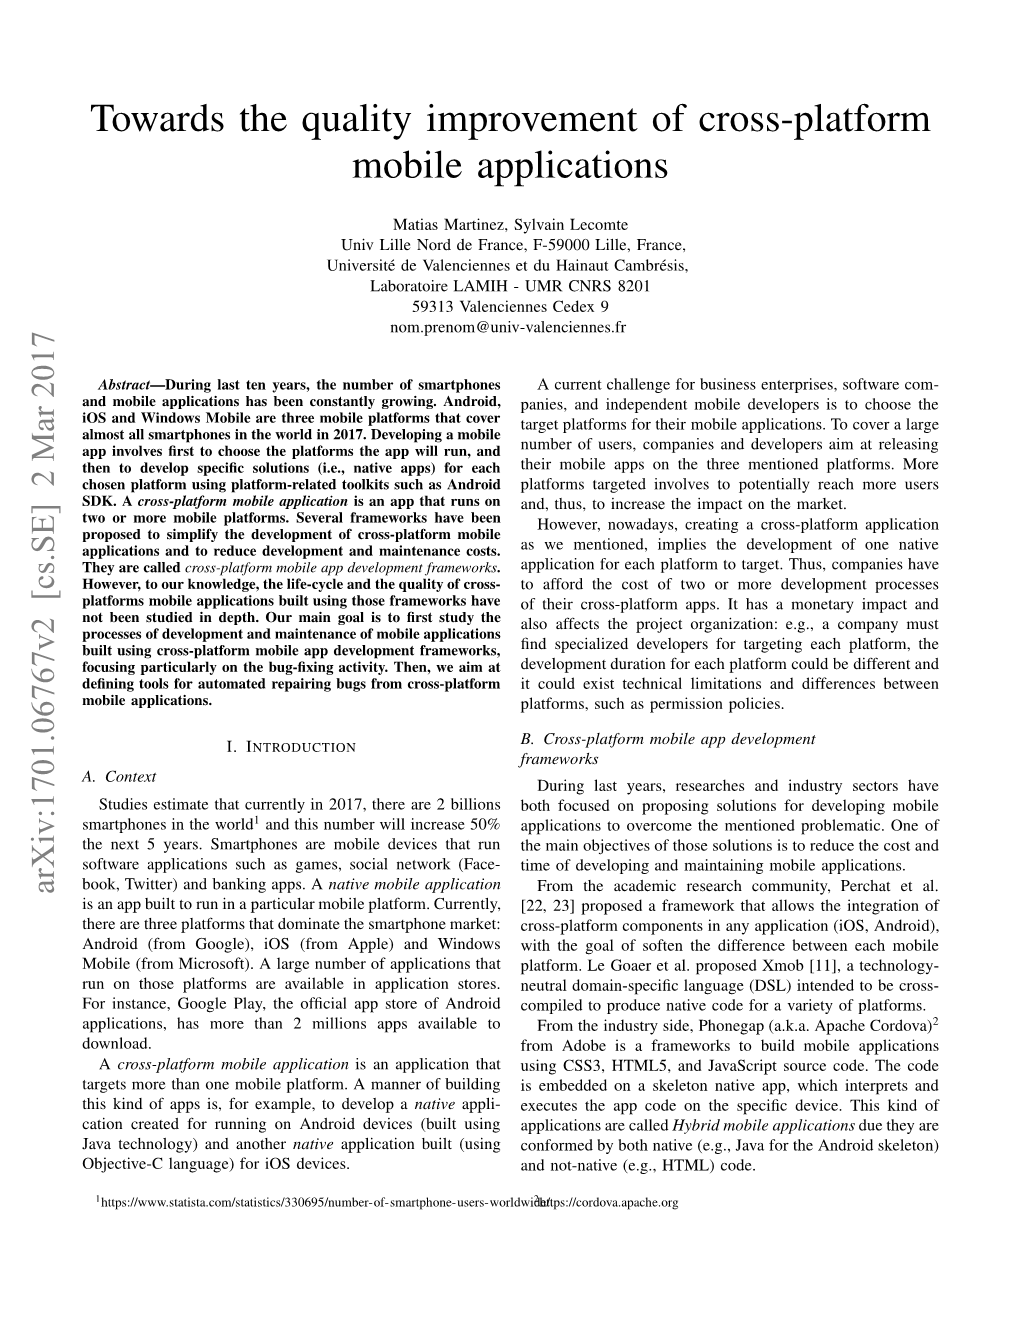 Towards the Quality Improvement of Cross-Platform Mobile Applications